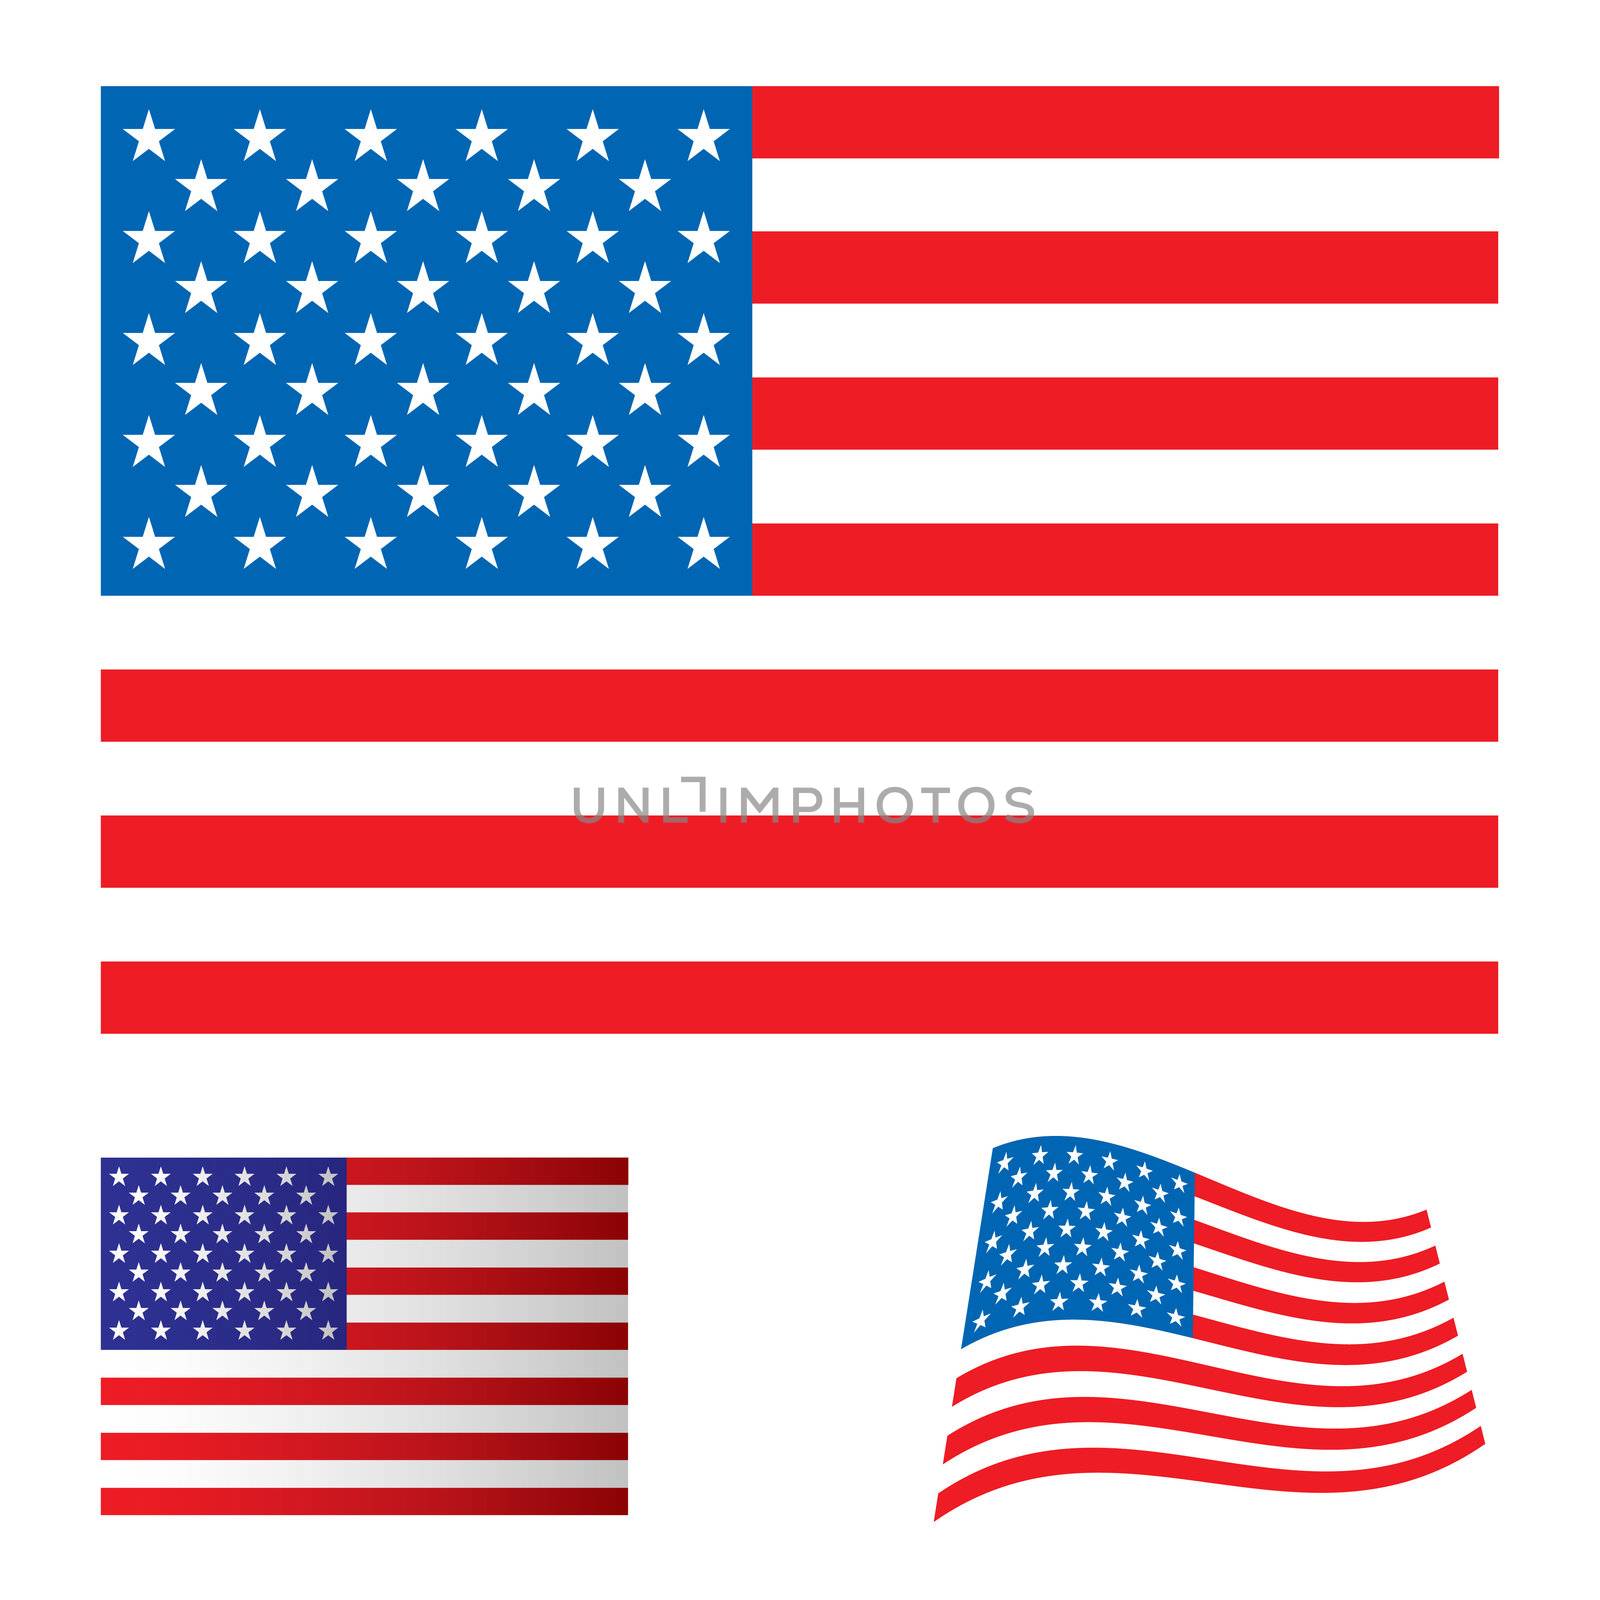 Illustrated collection flag icon set for the united states of america